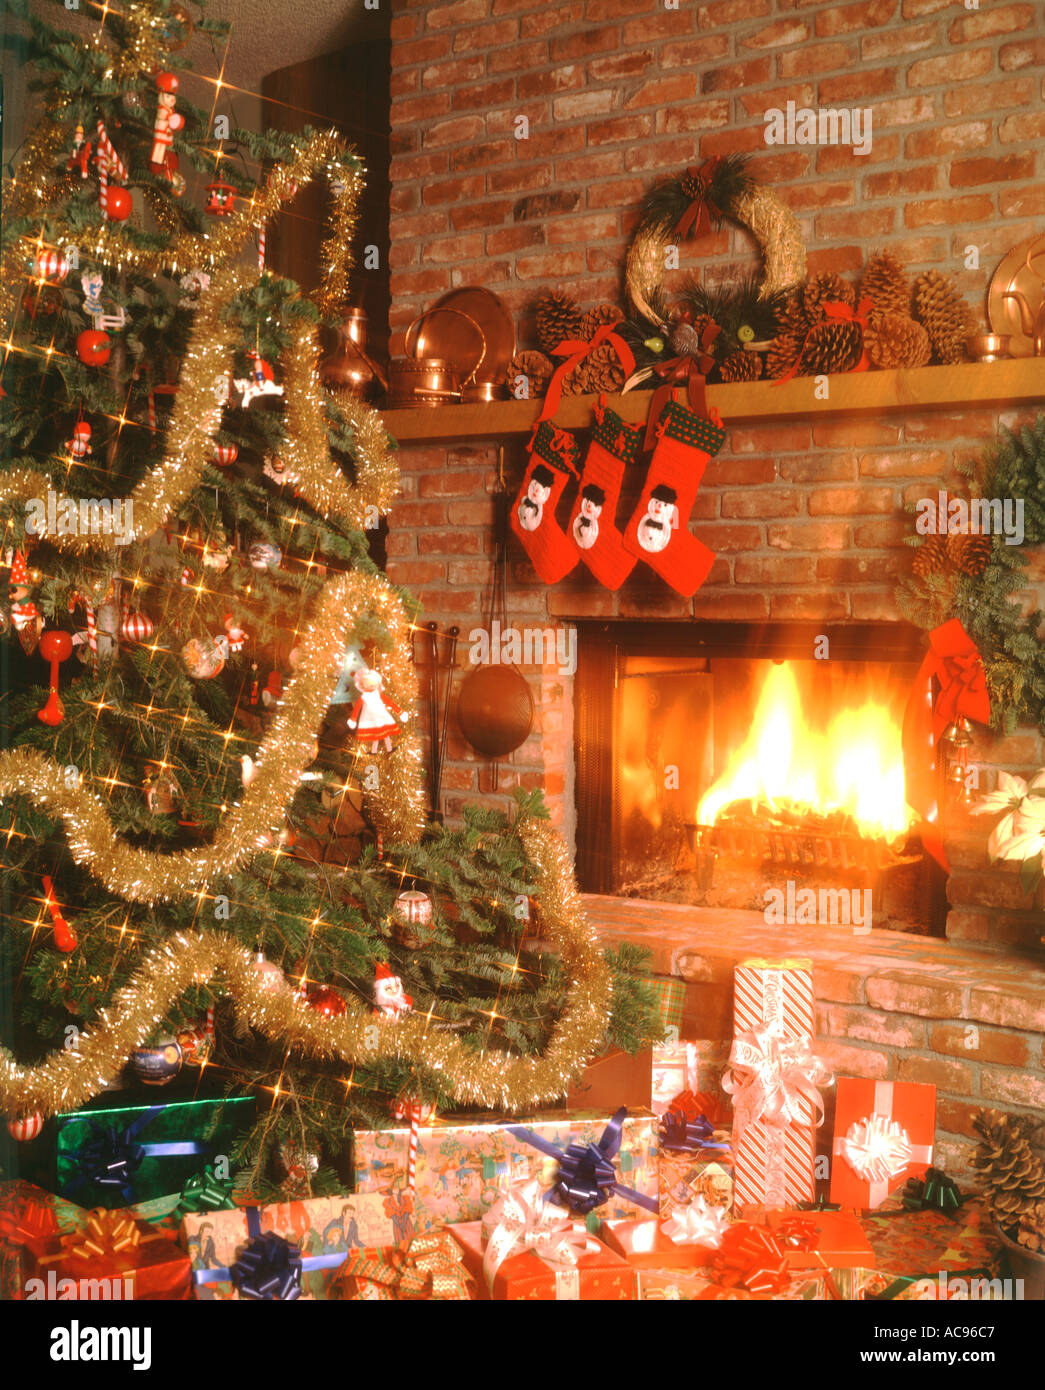 Christmas still life showing a decorated Christmas tree with presents in front of a blazing fireplace Stock Photo